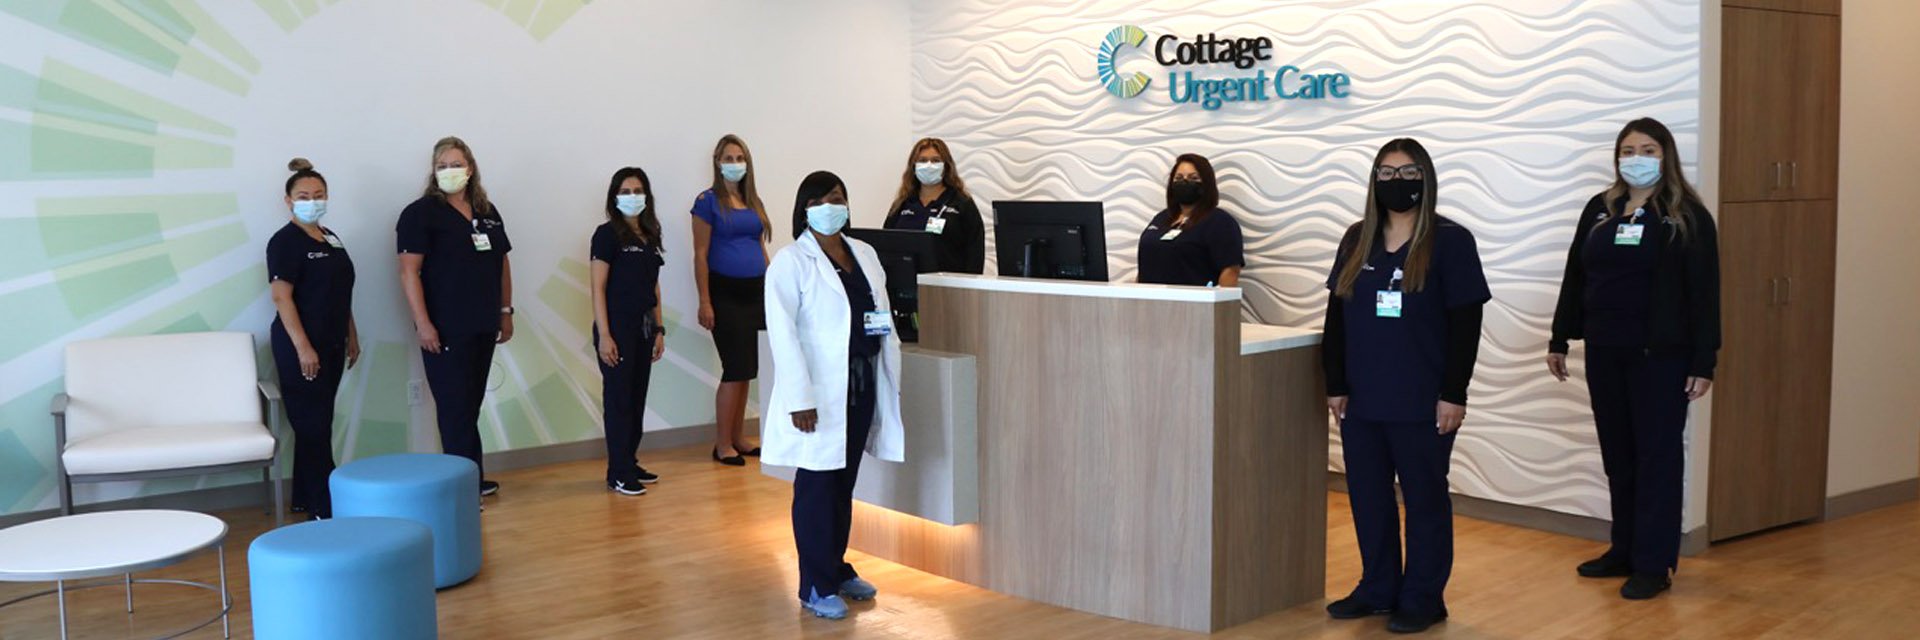 Staff standing in the Interior of a Cottage Urgent Care Center